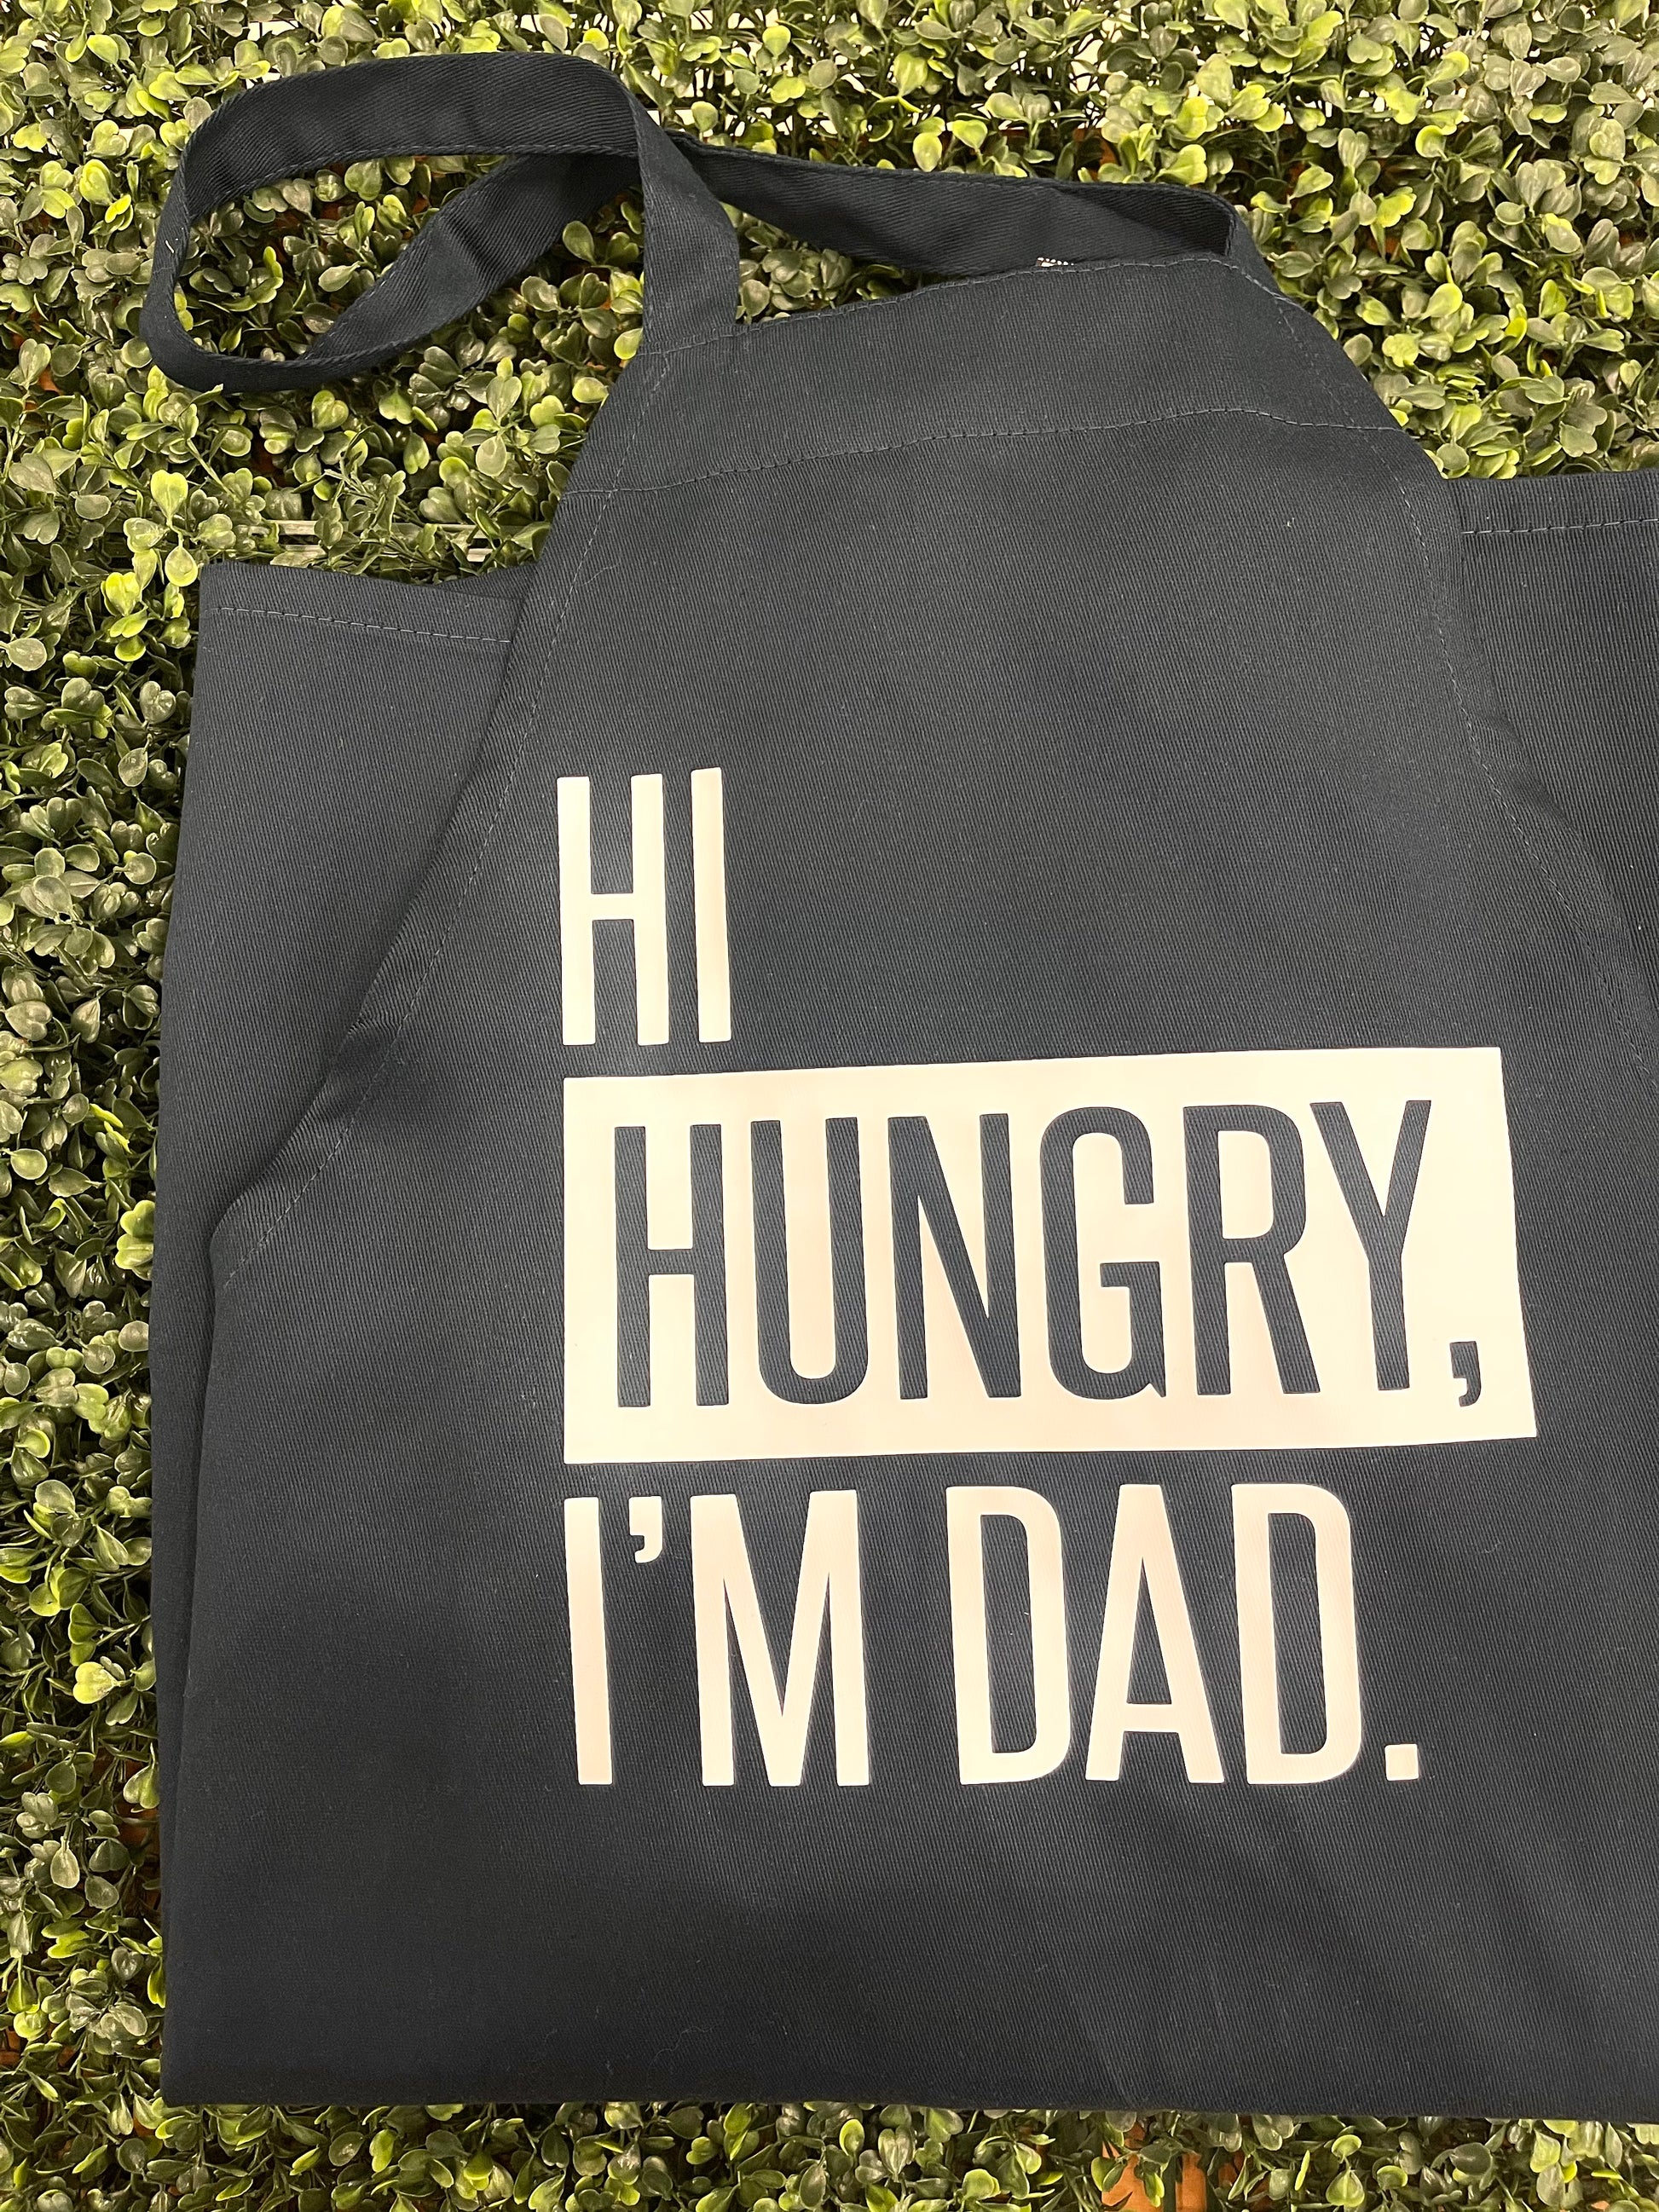 This is a navy blue apron that goes around the neck and has an adjustable tie in the back. It has a white graphic, stating, "HI HUNGRY, I'M DAD." This is a perfect gift option for the dads who love dad jokes!